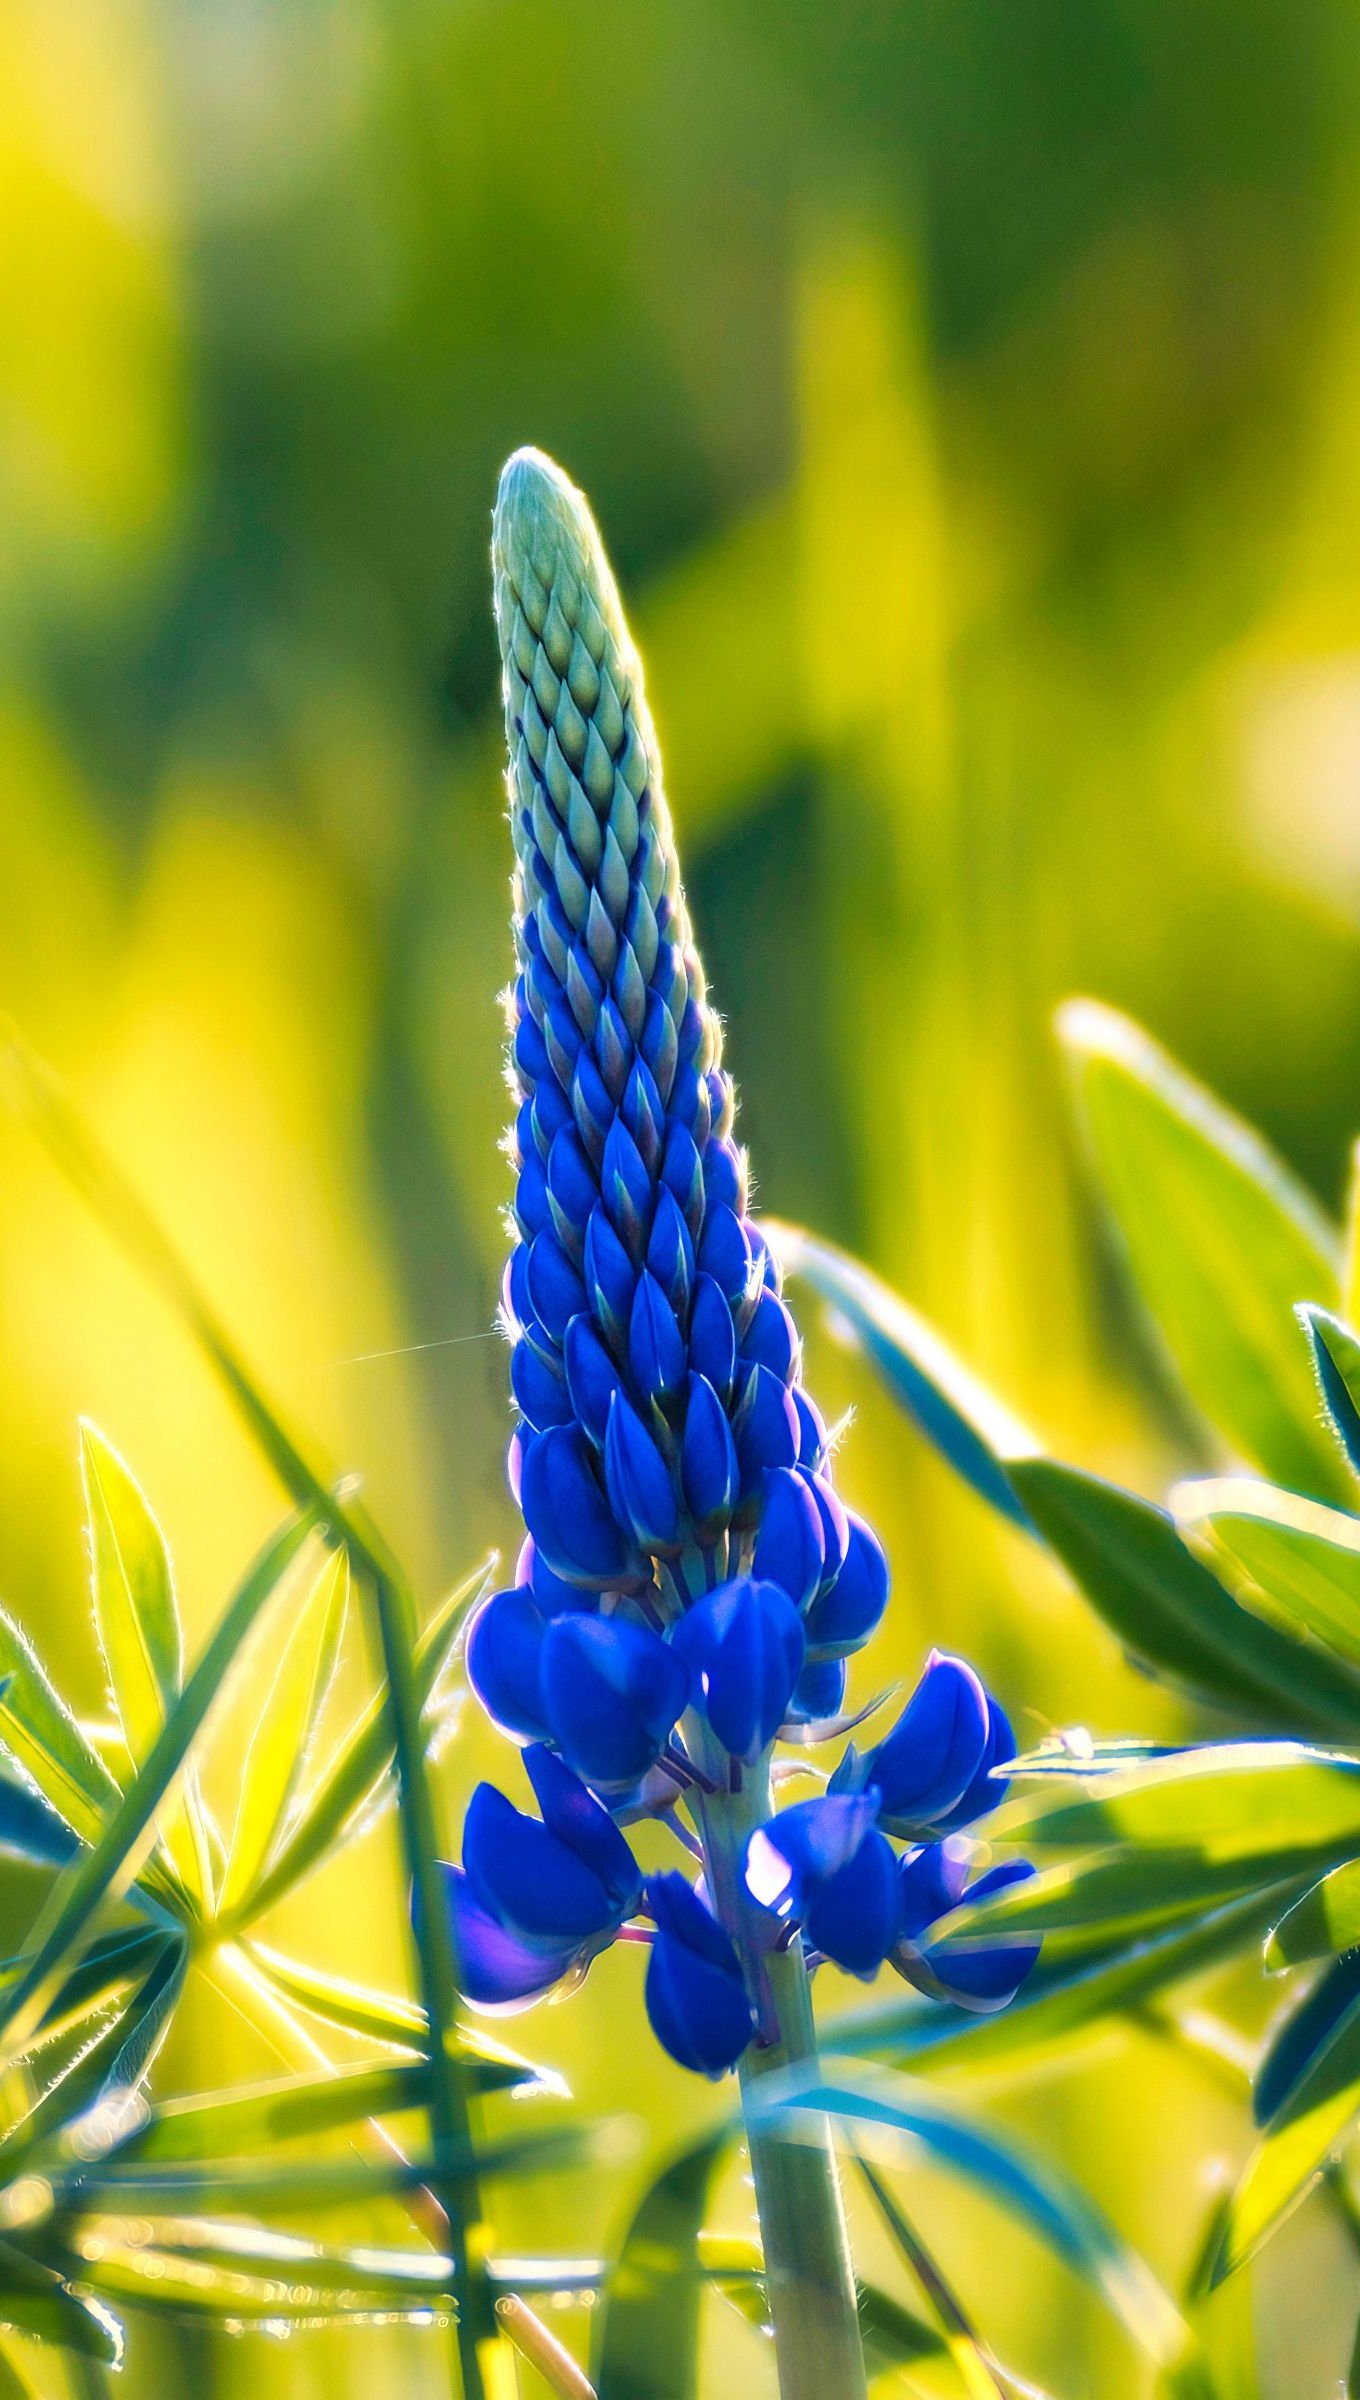 Lupine with leaves Wallpaper 4k Ultra HD ID:10188